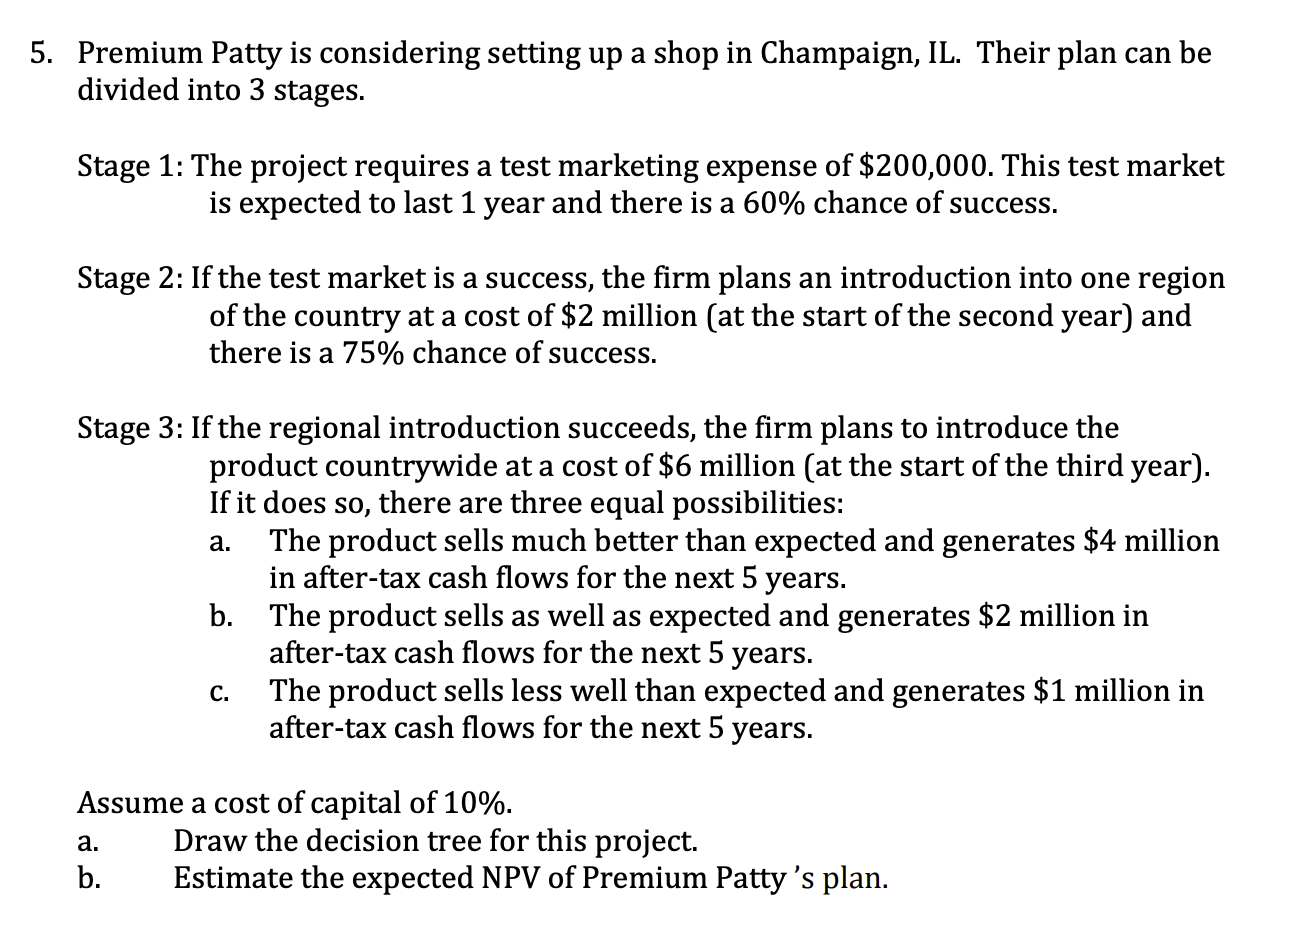 5. Premium Patty is considering setting up a shop in Champaign, IL. Their plan can be divided into 3 stages.